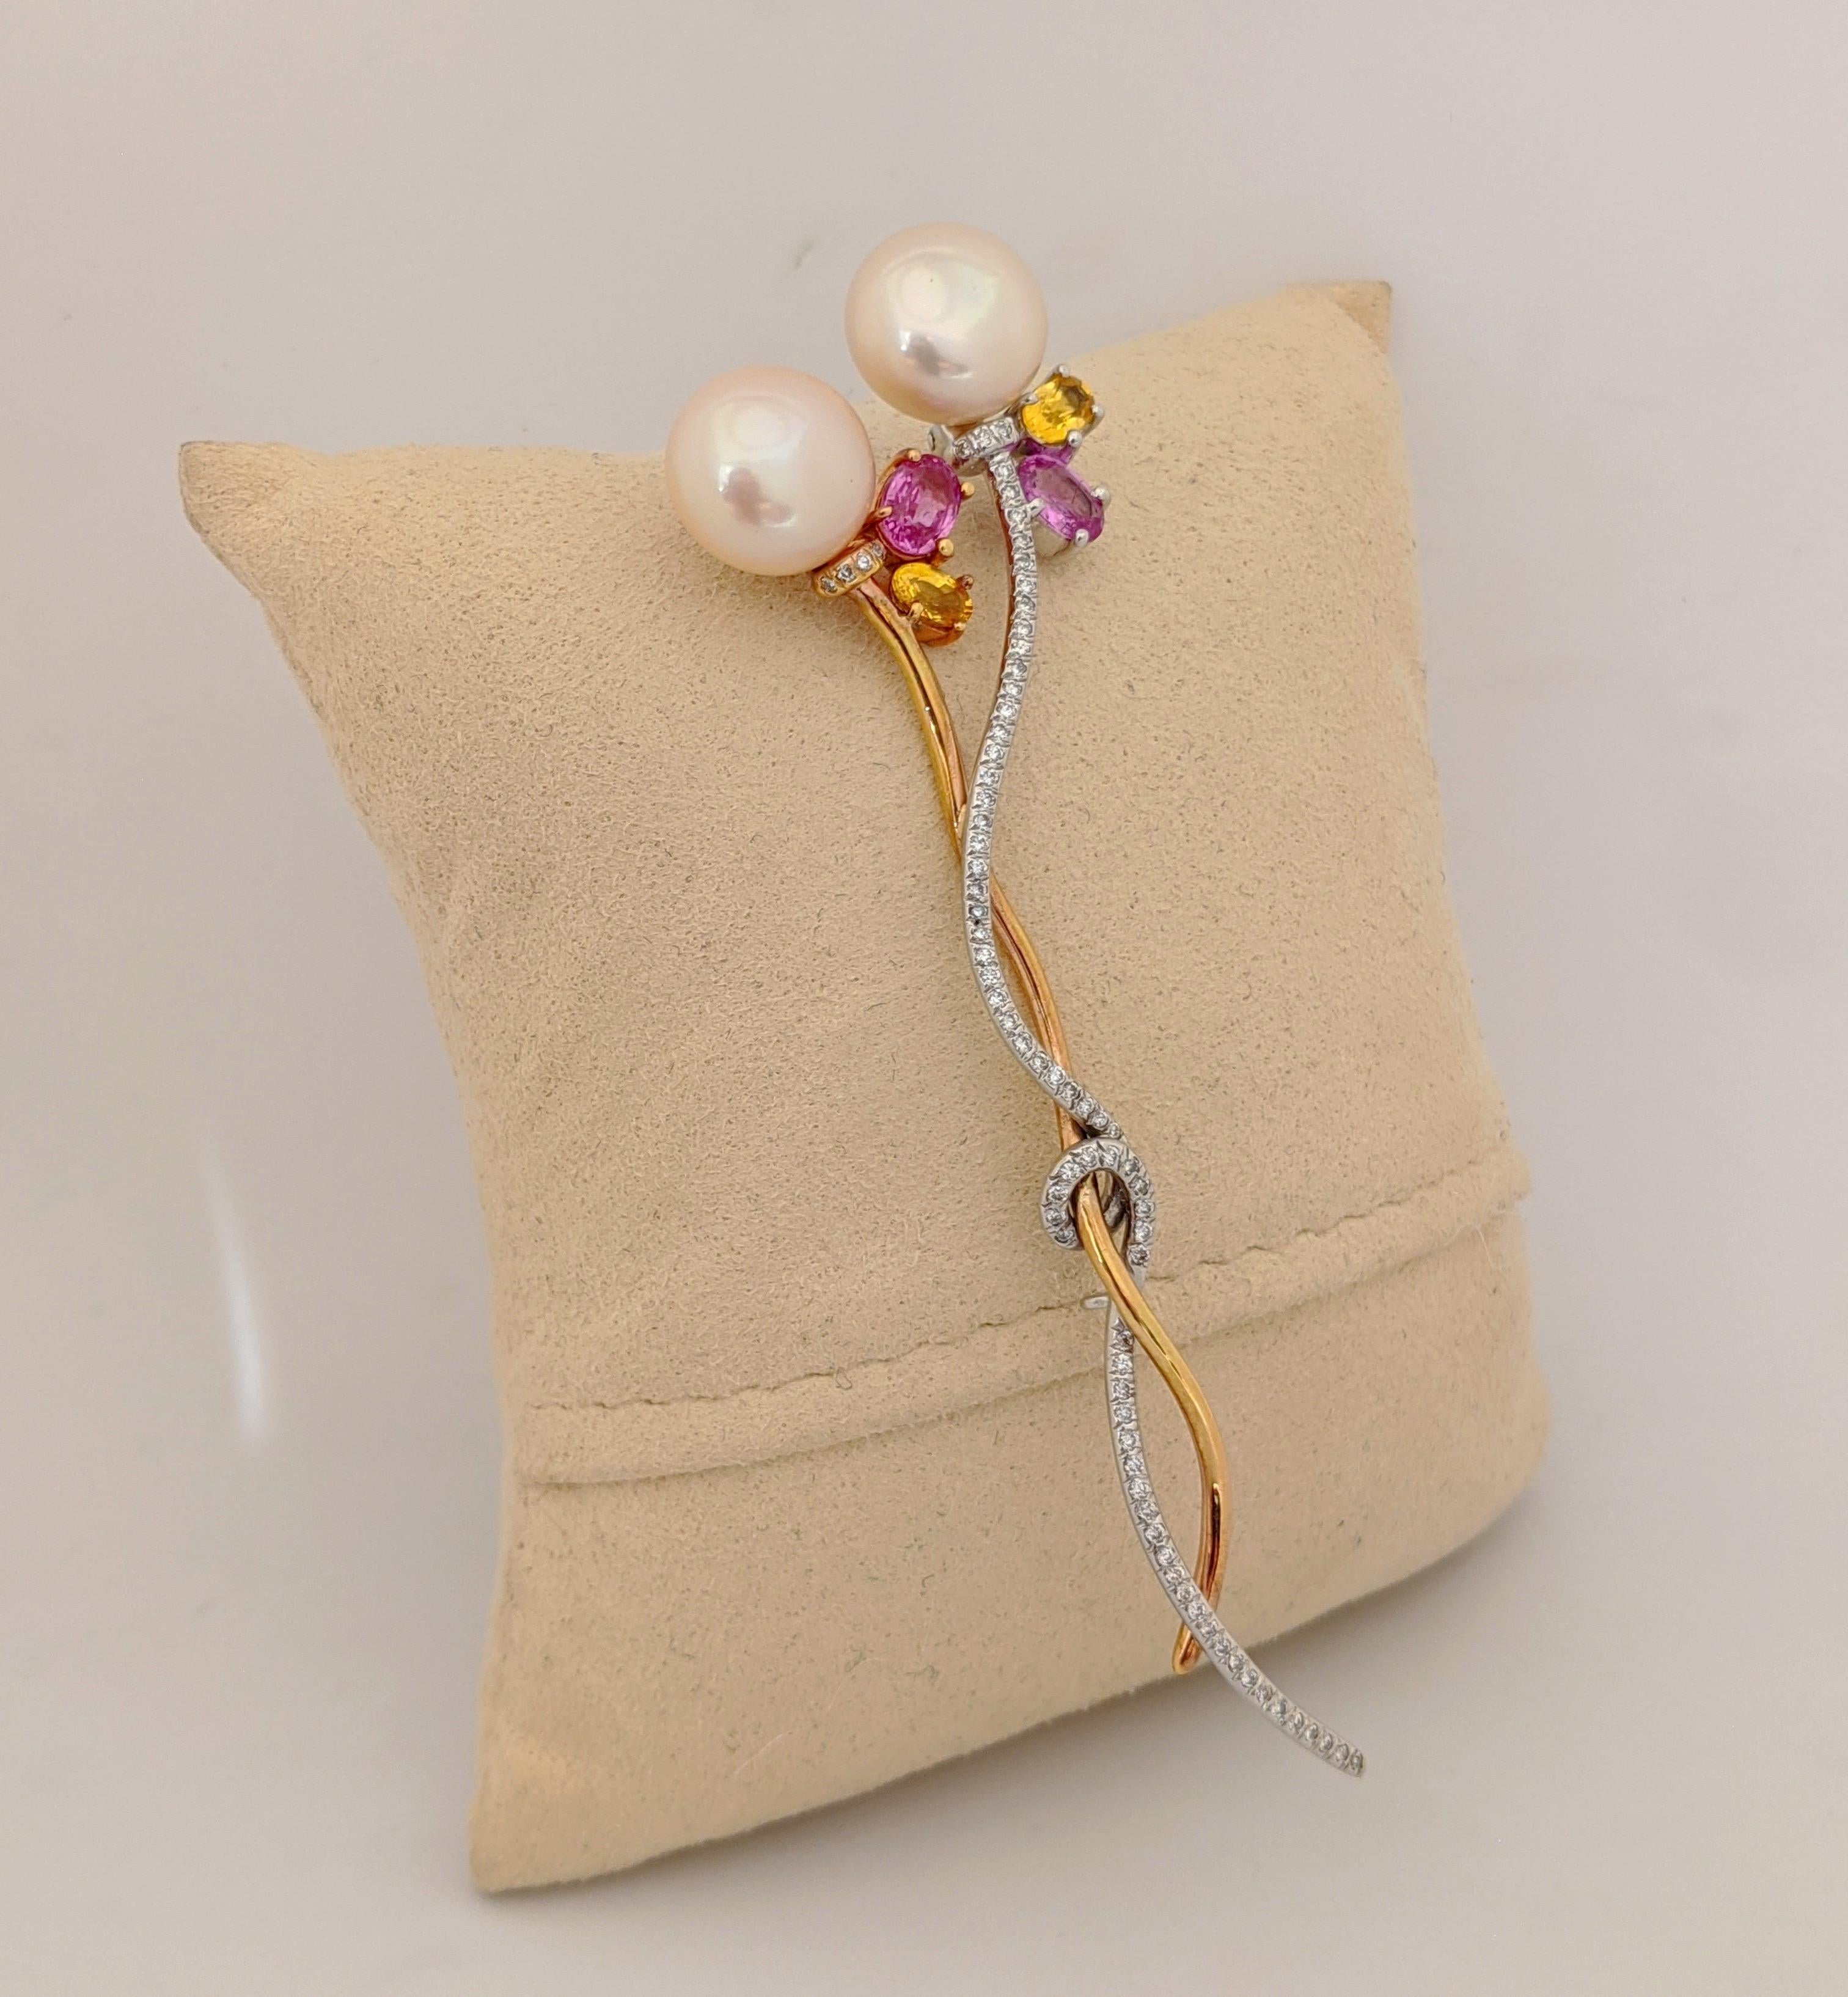 A lovely brooch to adorn a lapel or dress, 
This  brooch is designed with two freshwater pink pearls 11.2mm x 8.5mm.  Four Pink and Yellow oval shaped Sapphires are set under the pearls. The 18 karat white gold stem is set with round brilliant